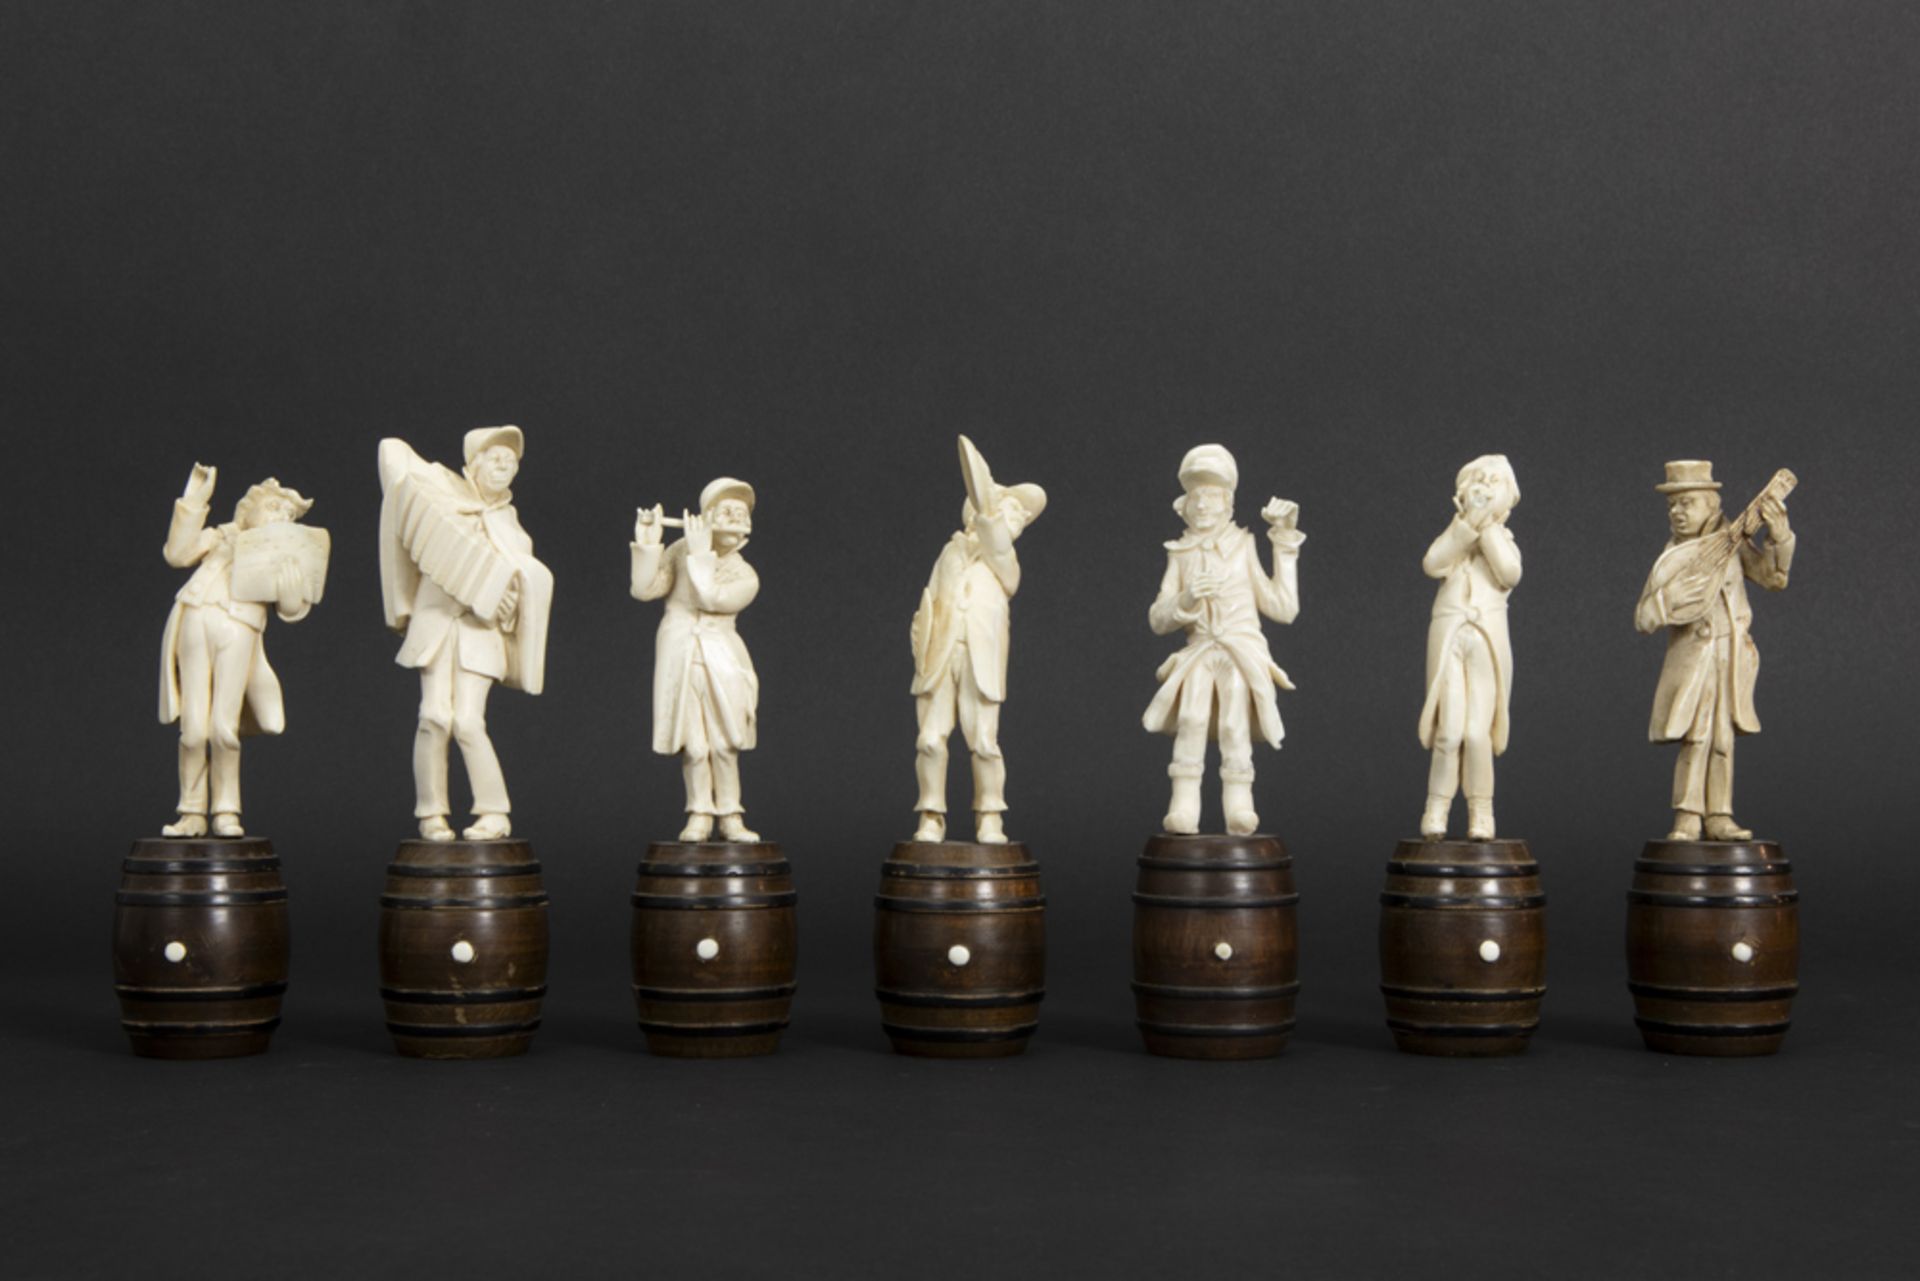 set of seven small antique figures in ivory, each standing on a wooden barrel - depicting a band